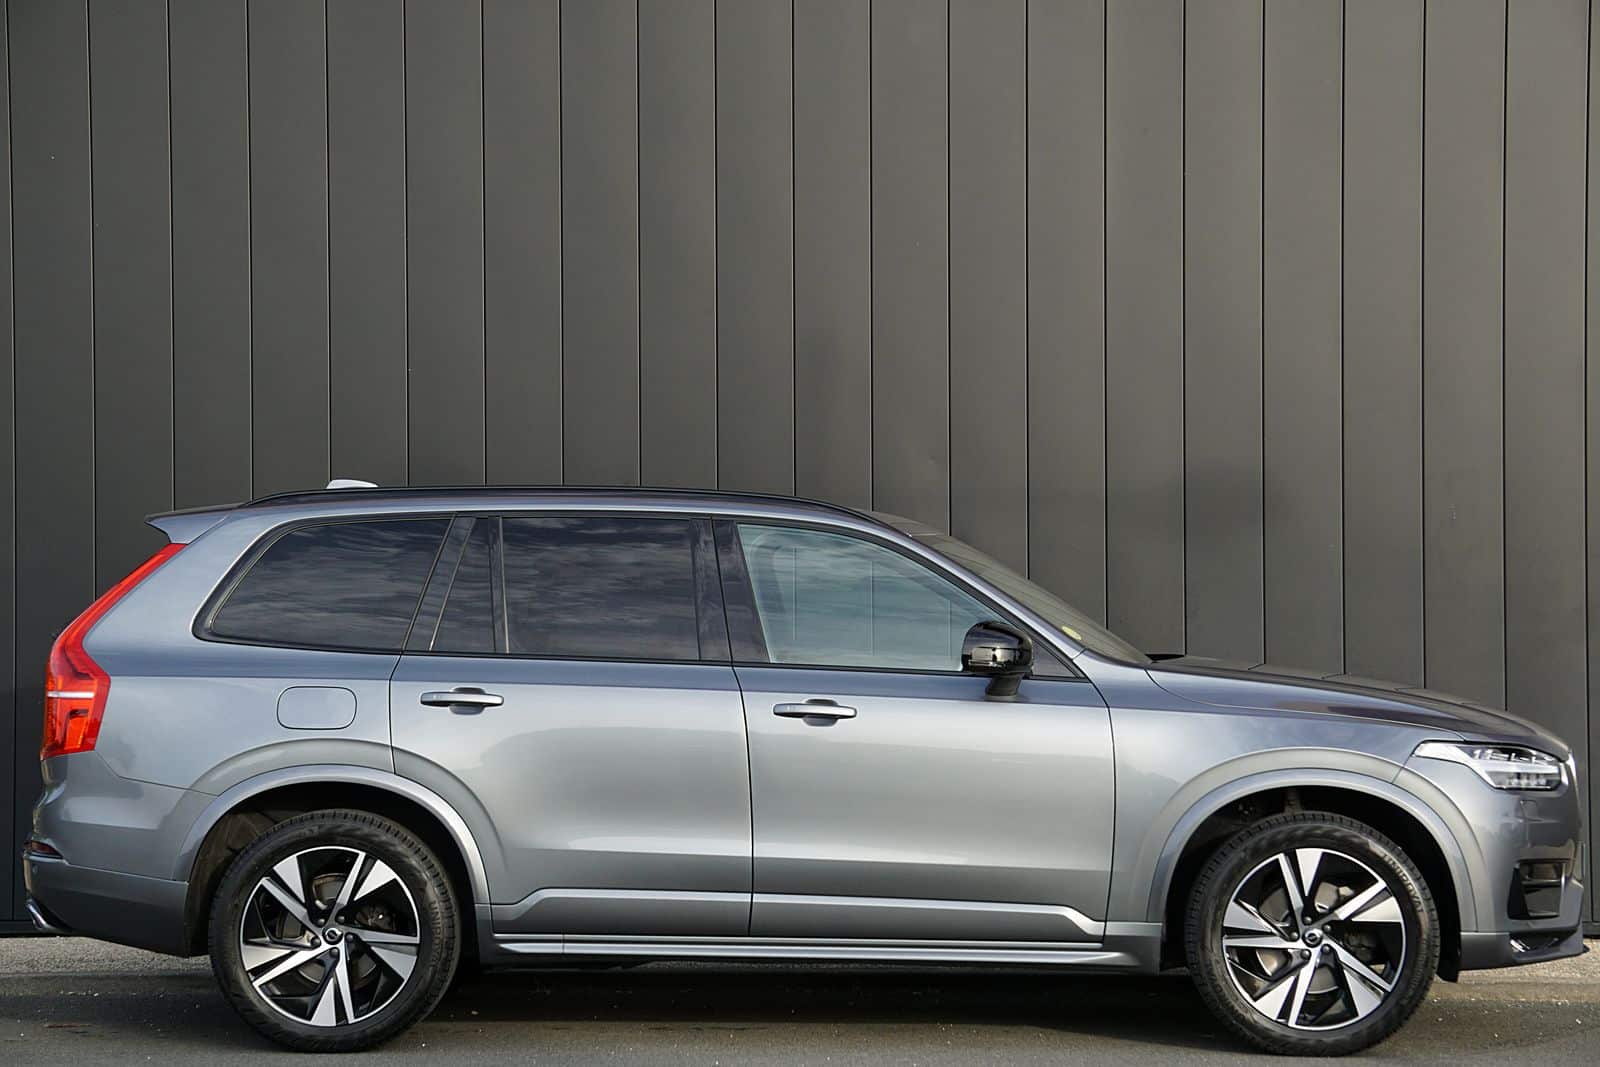 VOLVO XC90 (II) Phase II B5 AWD 235 CV R-Design Geartronic 5 places Occasion 79 abcautofrance (abc auto france) 9